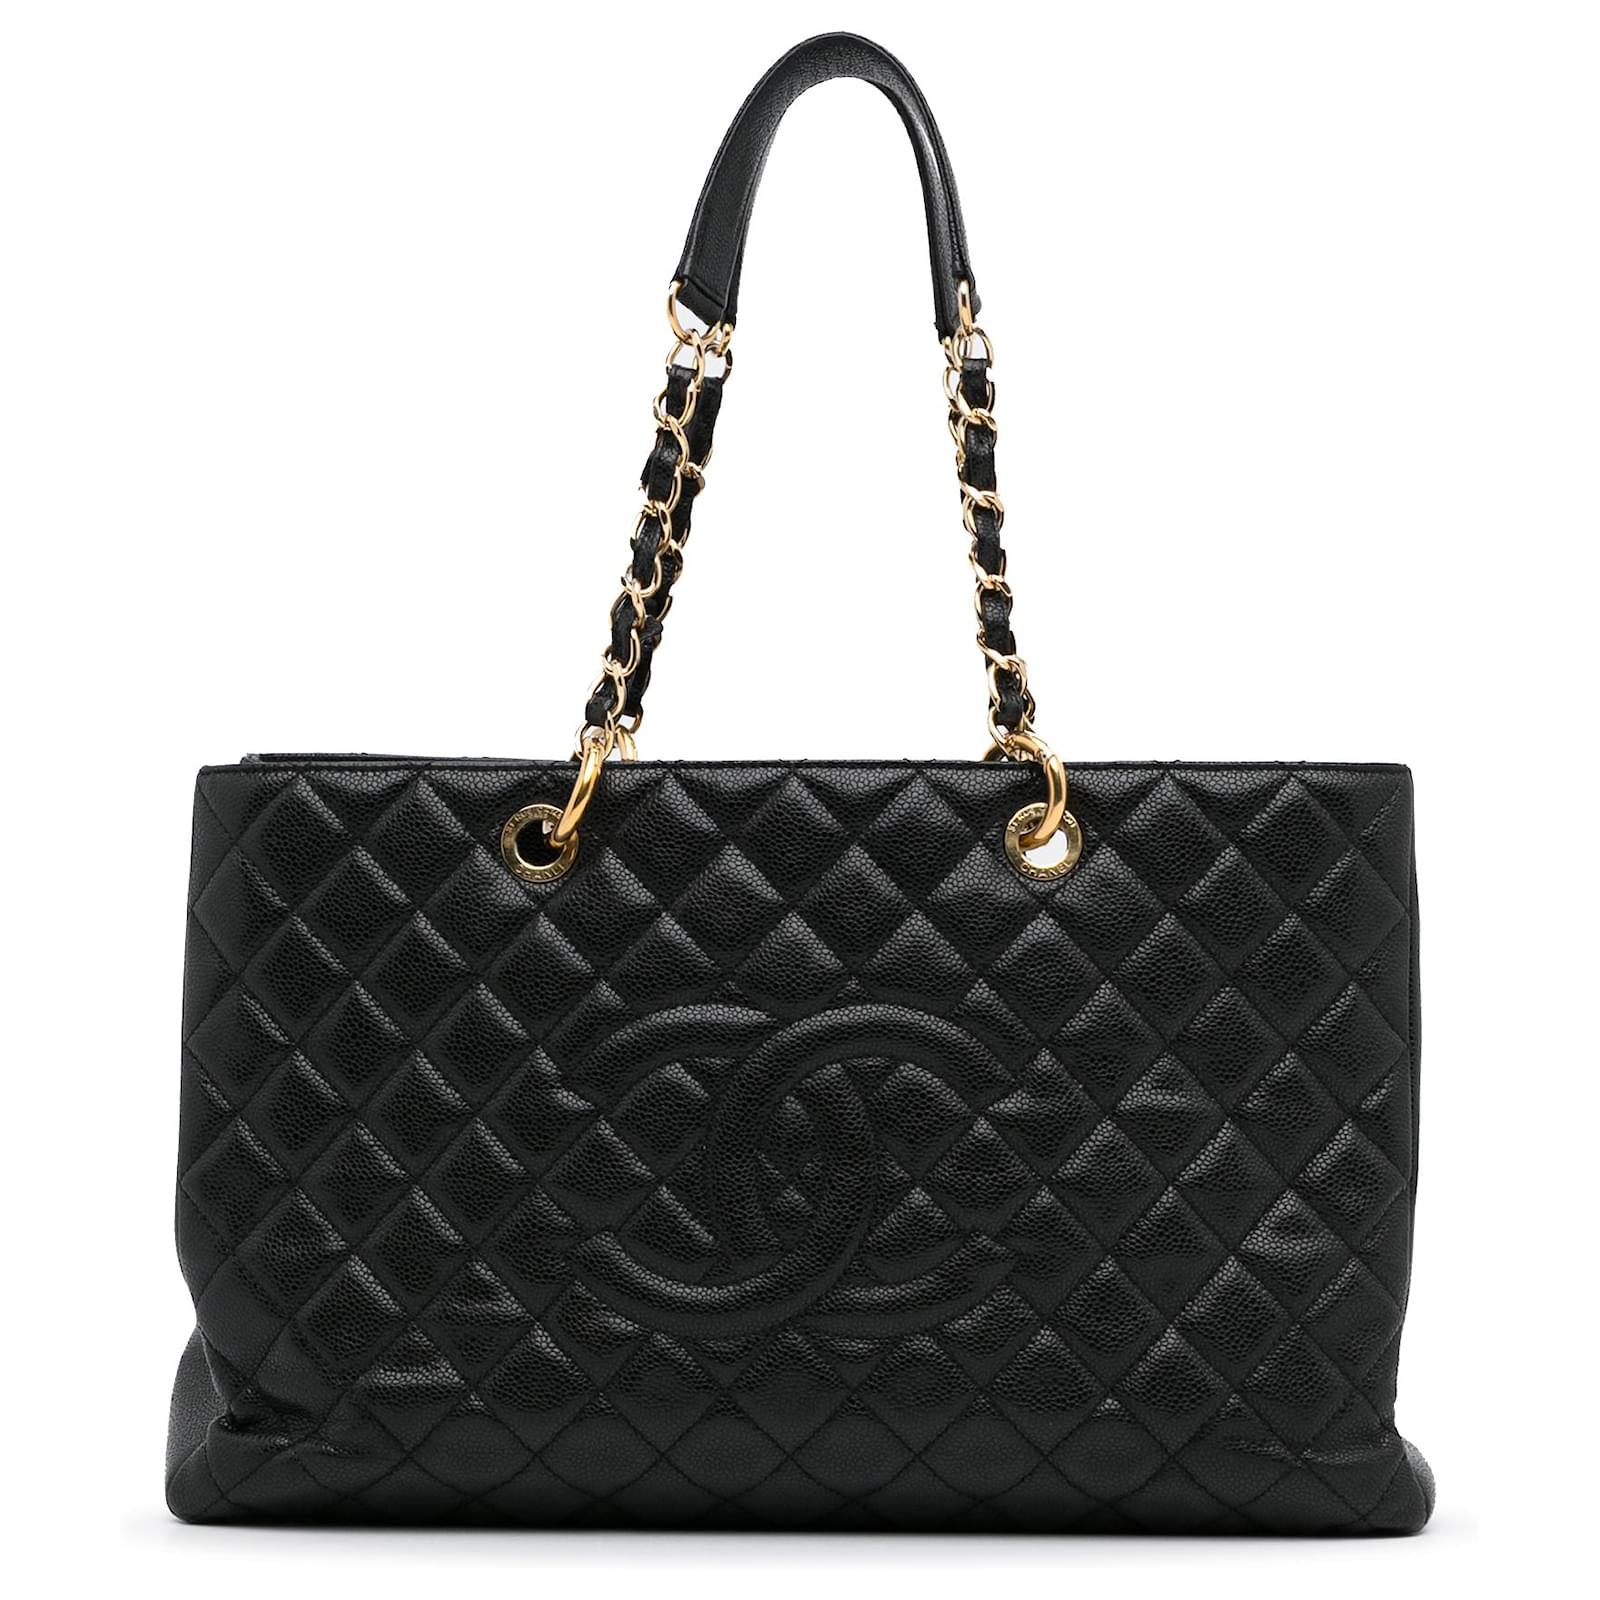 Chanel Black Caviar Grand Shopping Tote Leather Pony-style